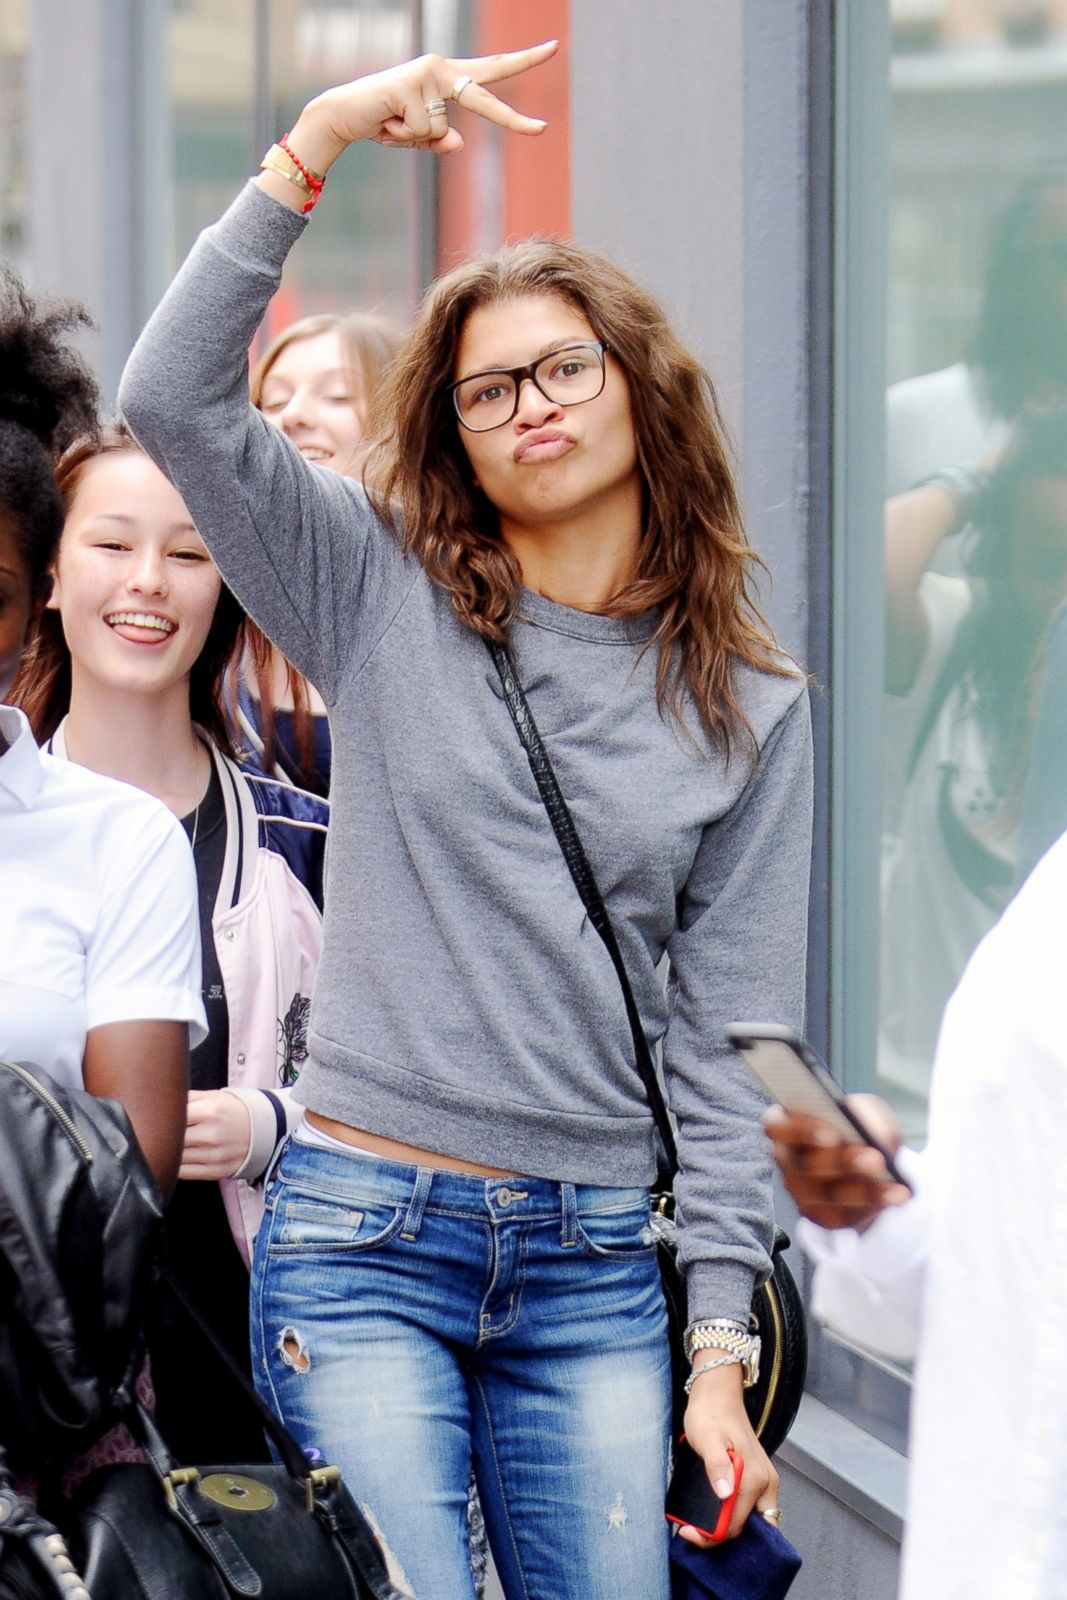 Zendaya Clowns Around Without Makeup from Demi Lovato Shows Off Her Freckle...